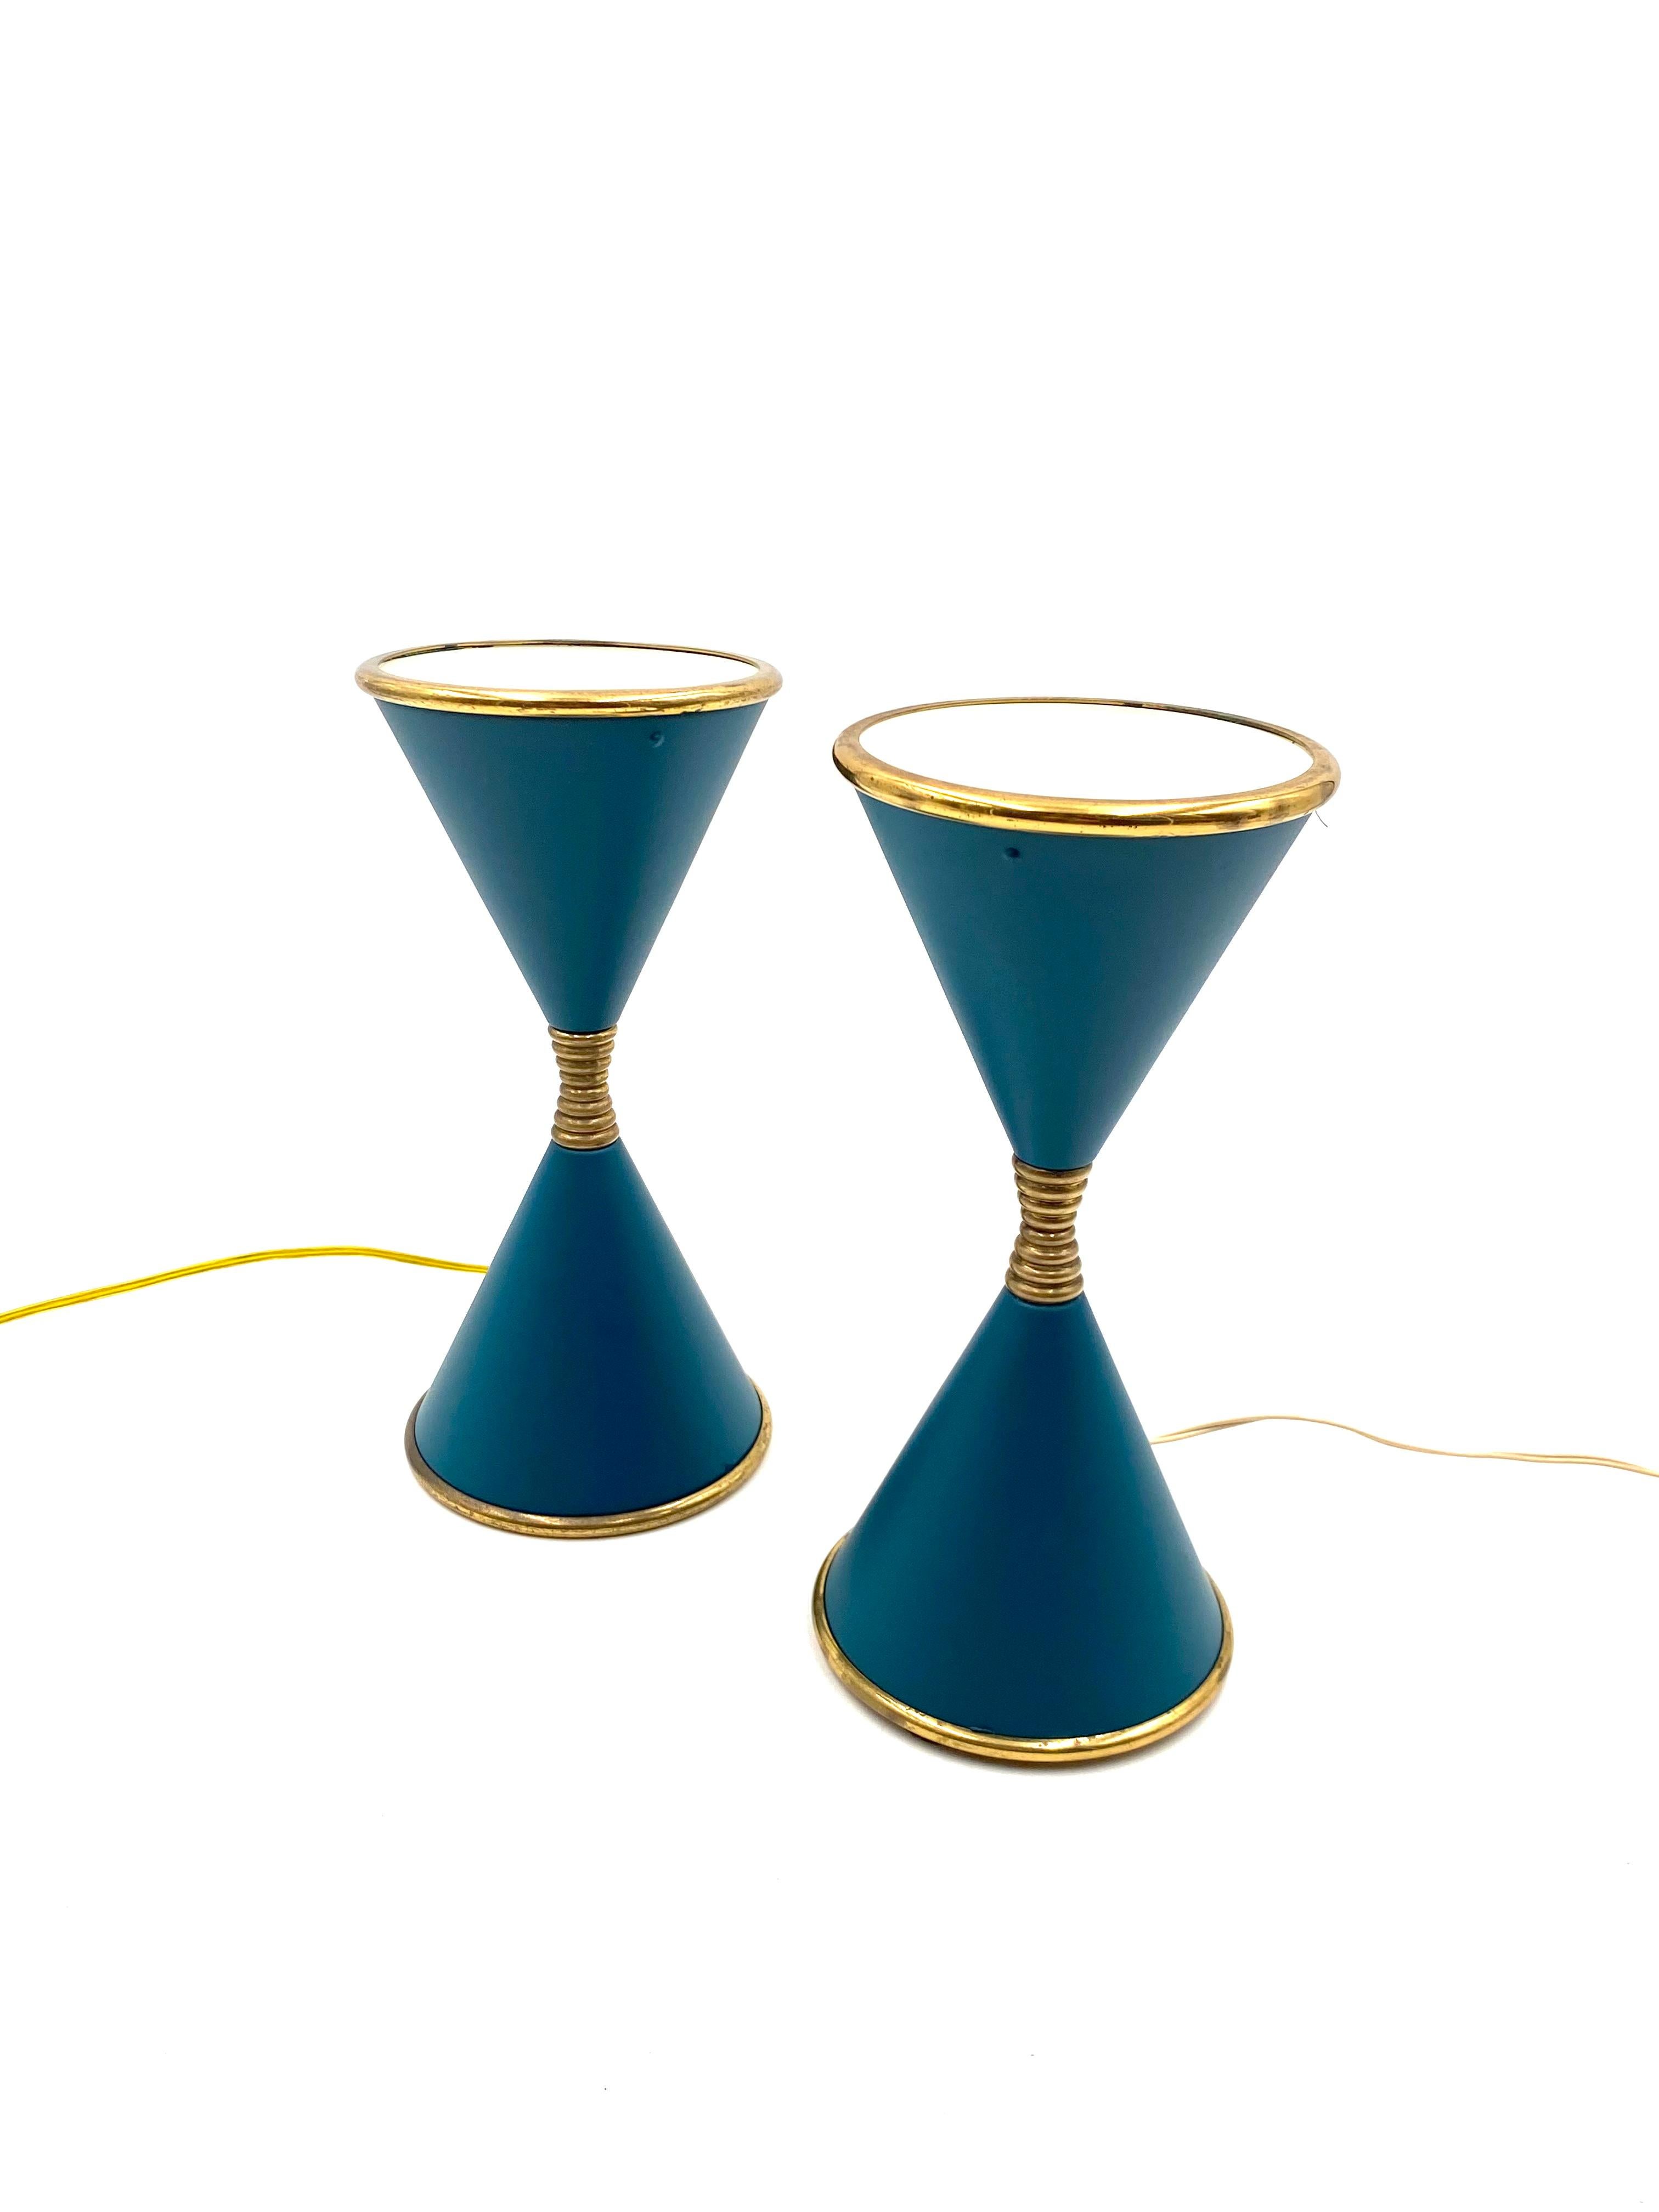 Italian Angelo Lelii, Set of 2 'Clessidra' Table Lamps, Arredoluce, Milan Italy, 1960 For Sale